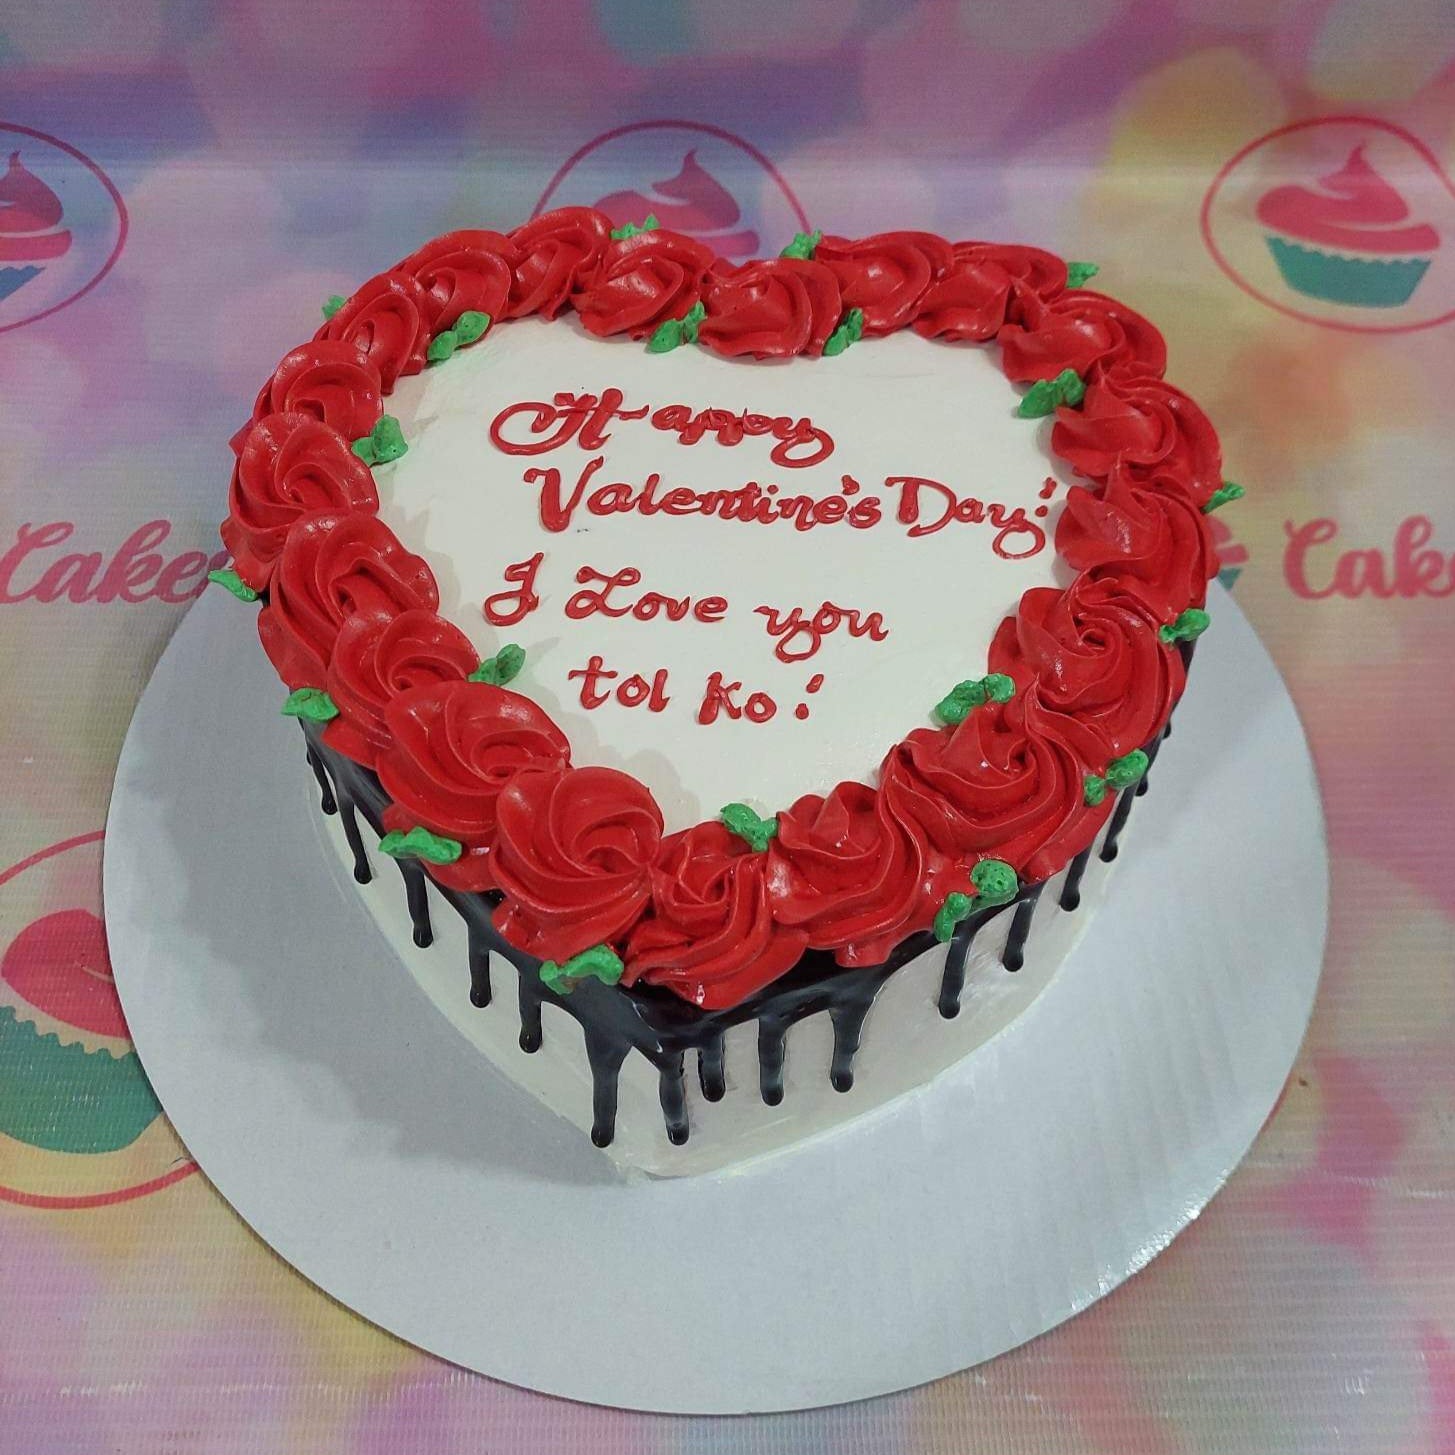 Valentine's Day Cake Decorating Compilation | CHELSWEETS - YouTube